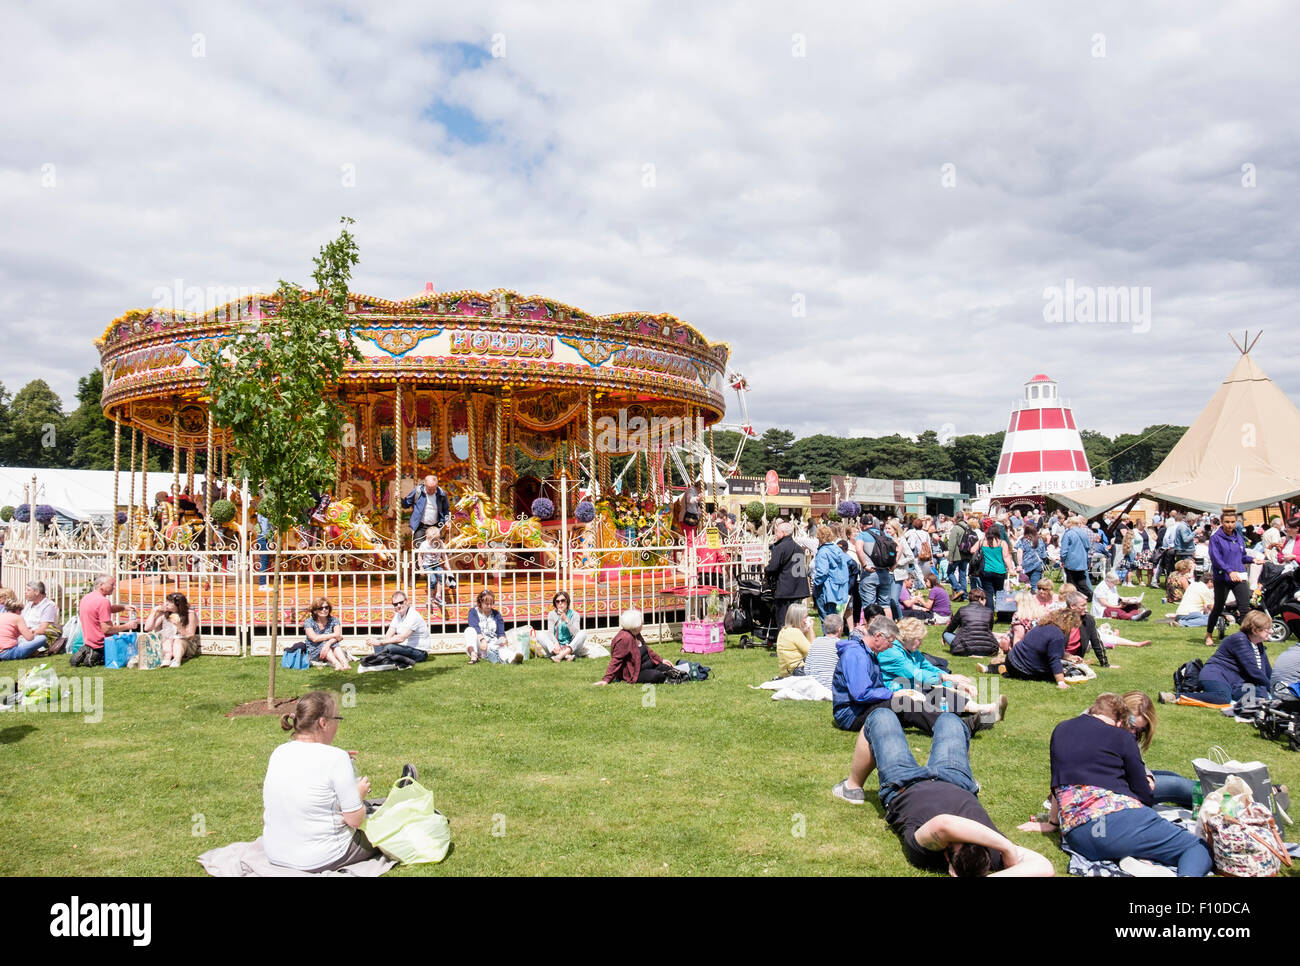 Visitors sitting in sunshine resting on lawns by Carousel at RHS Cheshire Flower Show, Tatton Park Knutsford Cheshire England UK Stock Photo